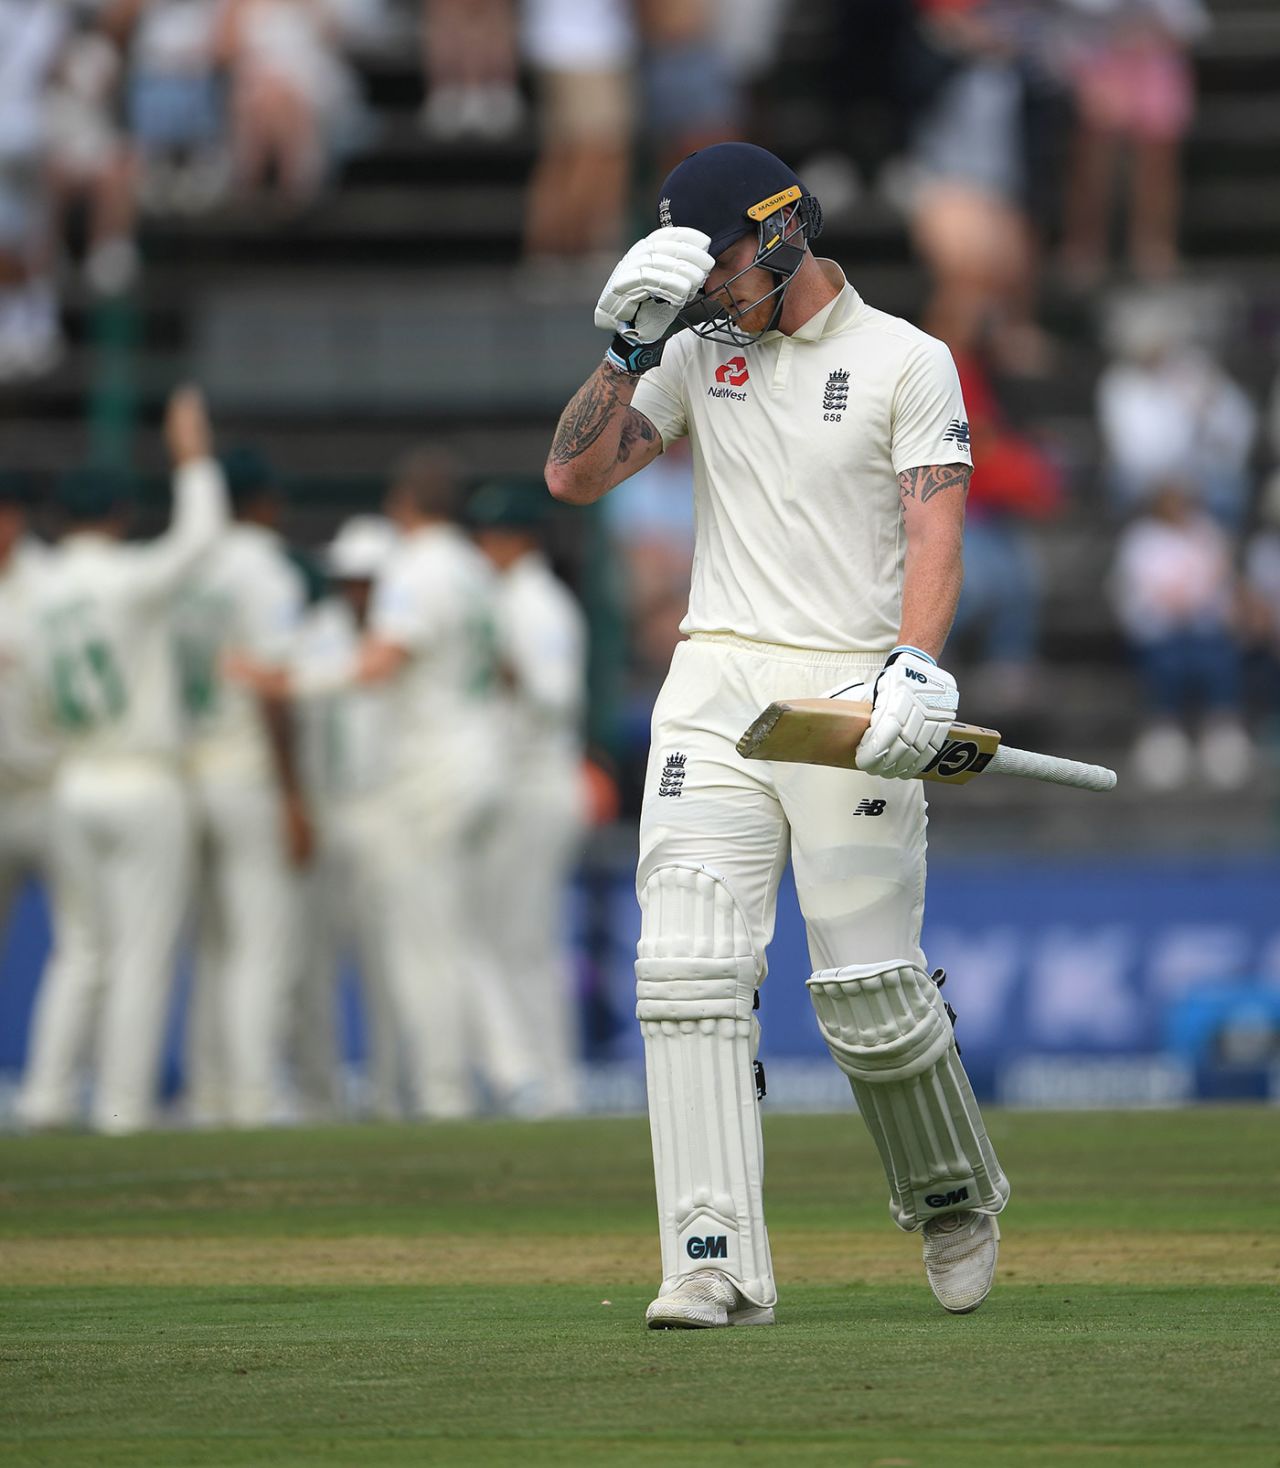 Ben Stokes endured a rare failure at the Wanderers, South Africa v England, 4th Test, Day 1, Johannesburg, January 24, 2020